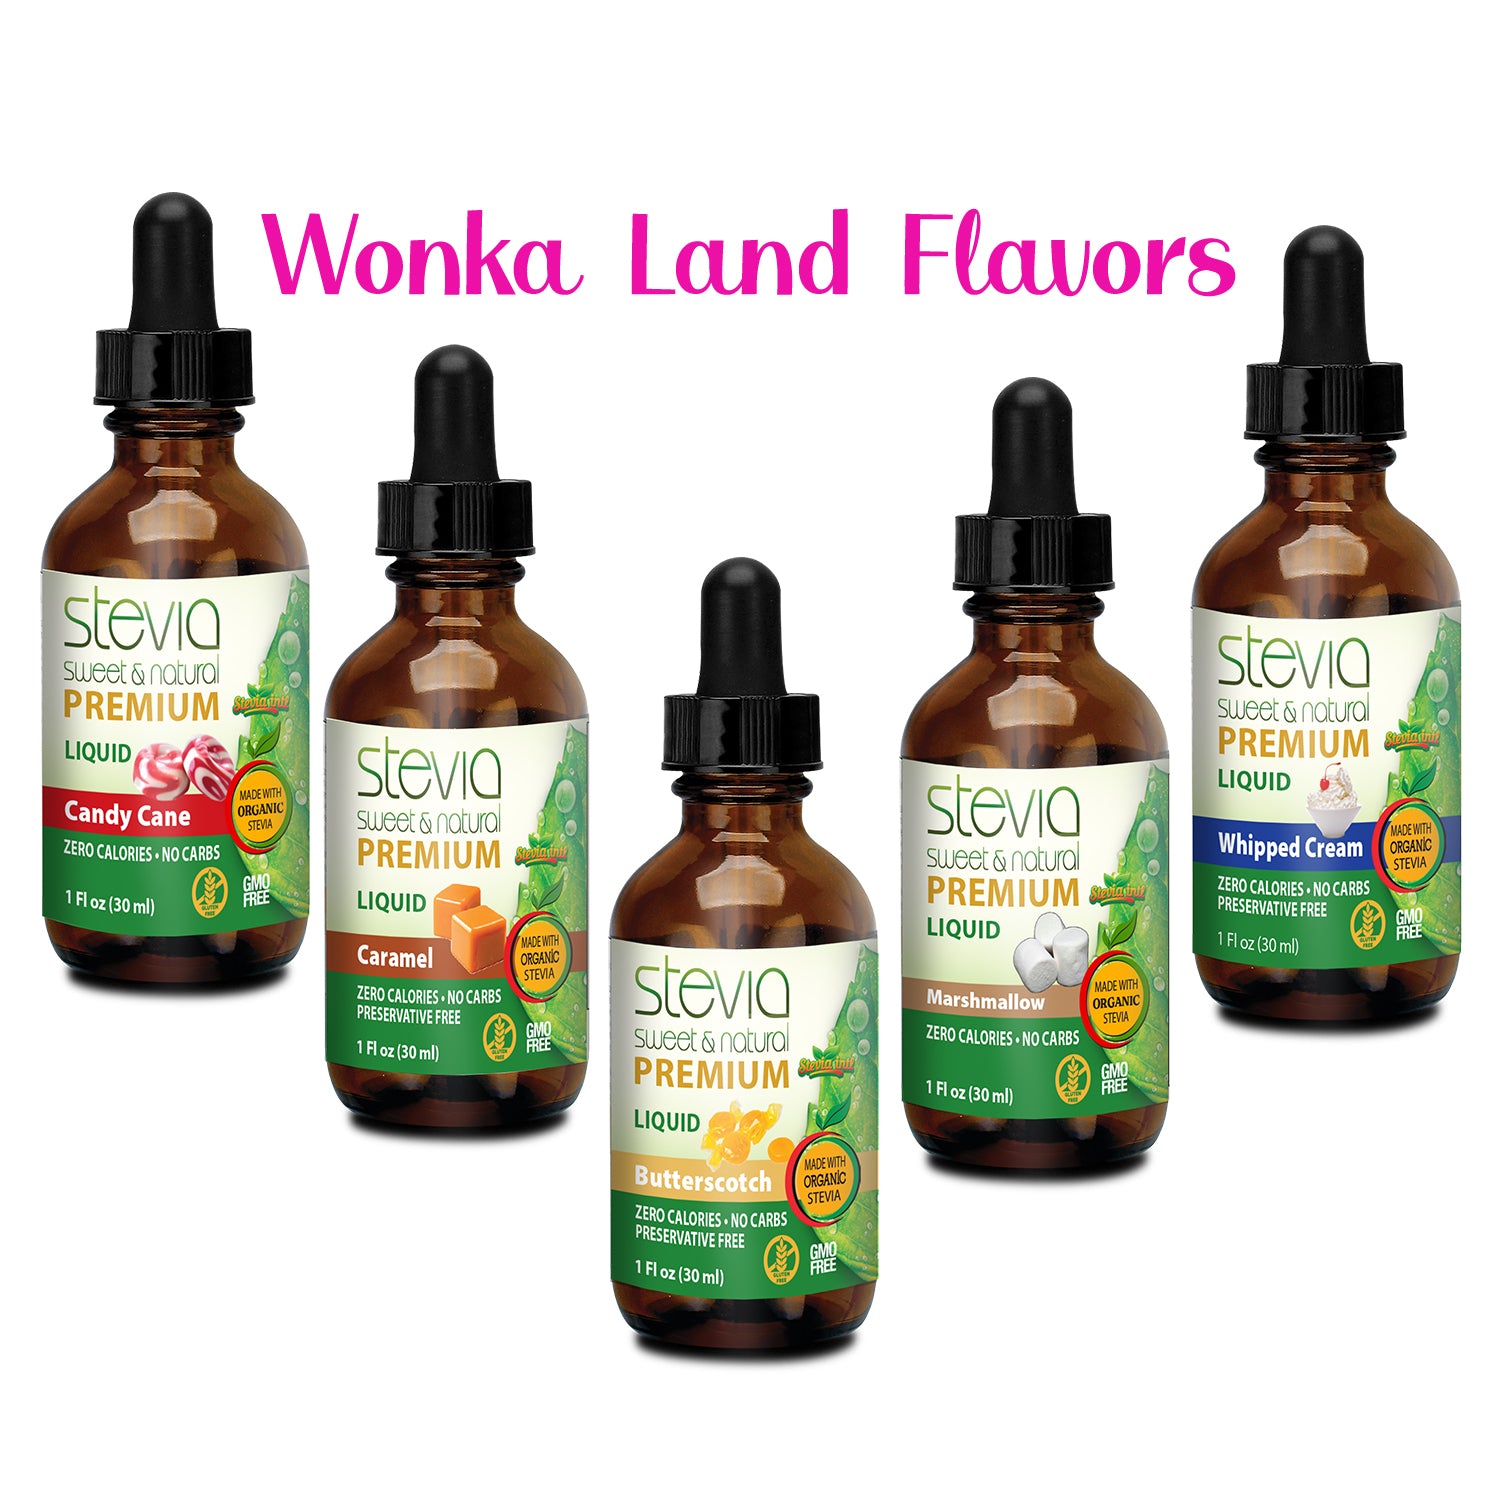 5 Pack Bundle Special Wonka Land Premium Stevia - Candy Cane, Caramel, Butterscotch, Marshmallow, Whipped Cream